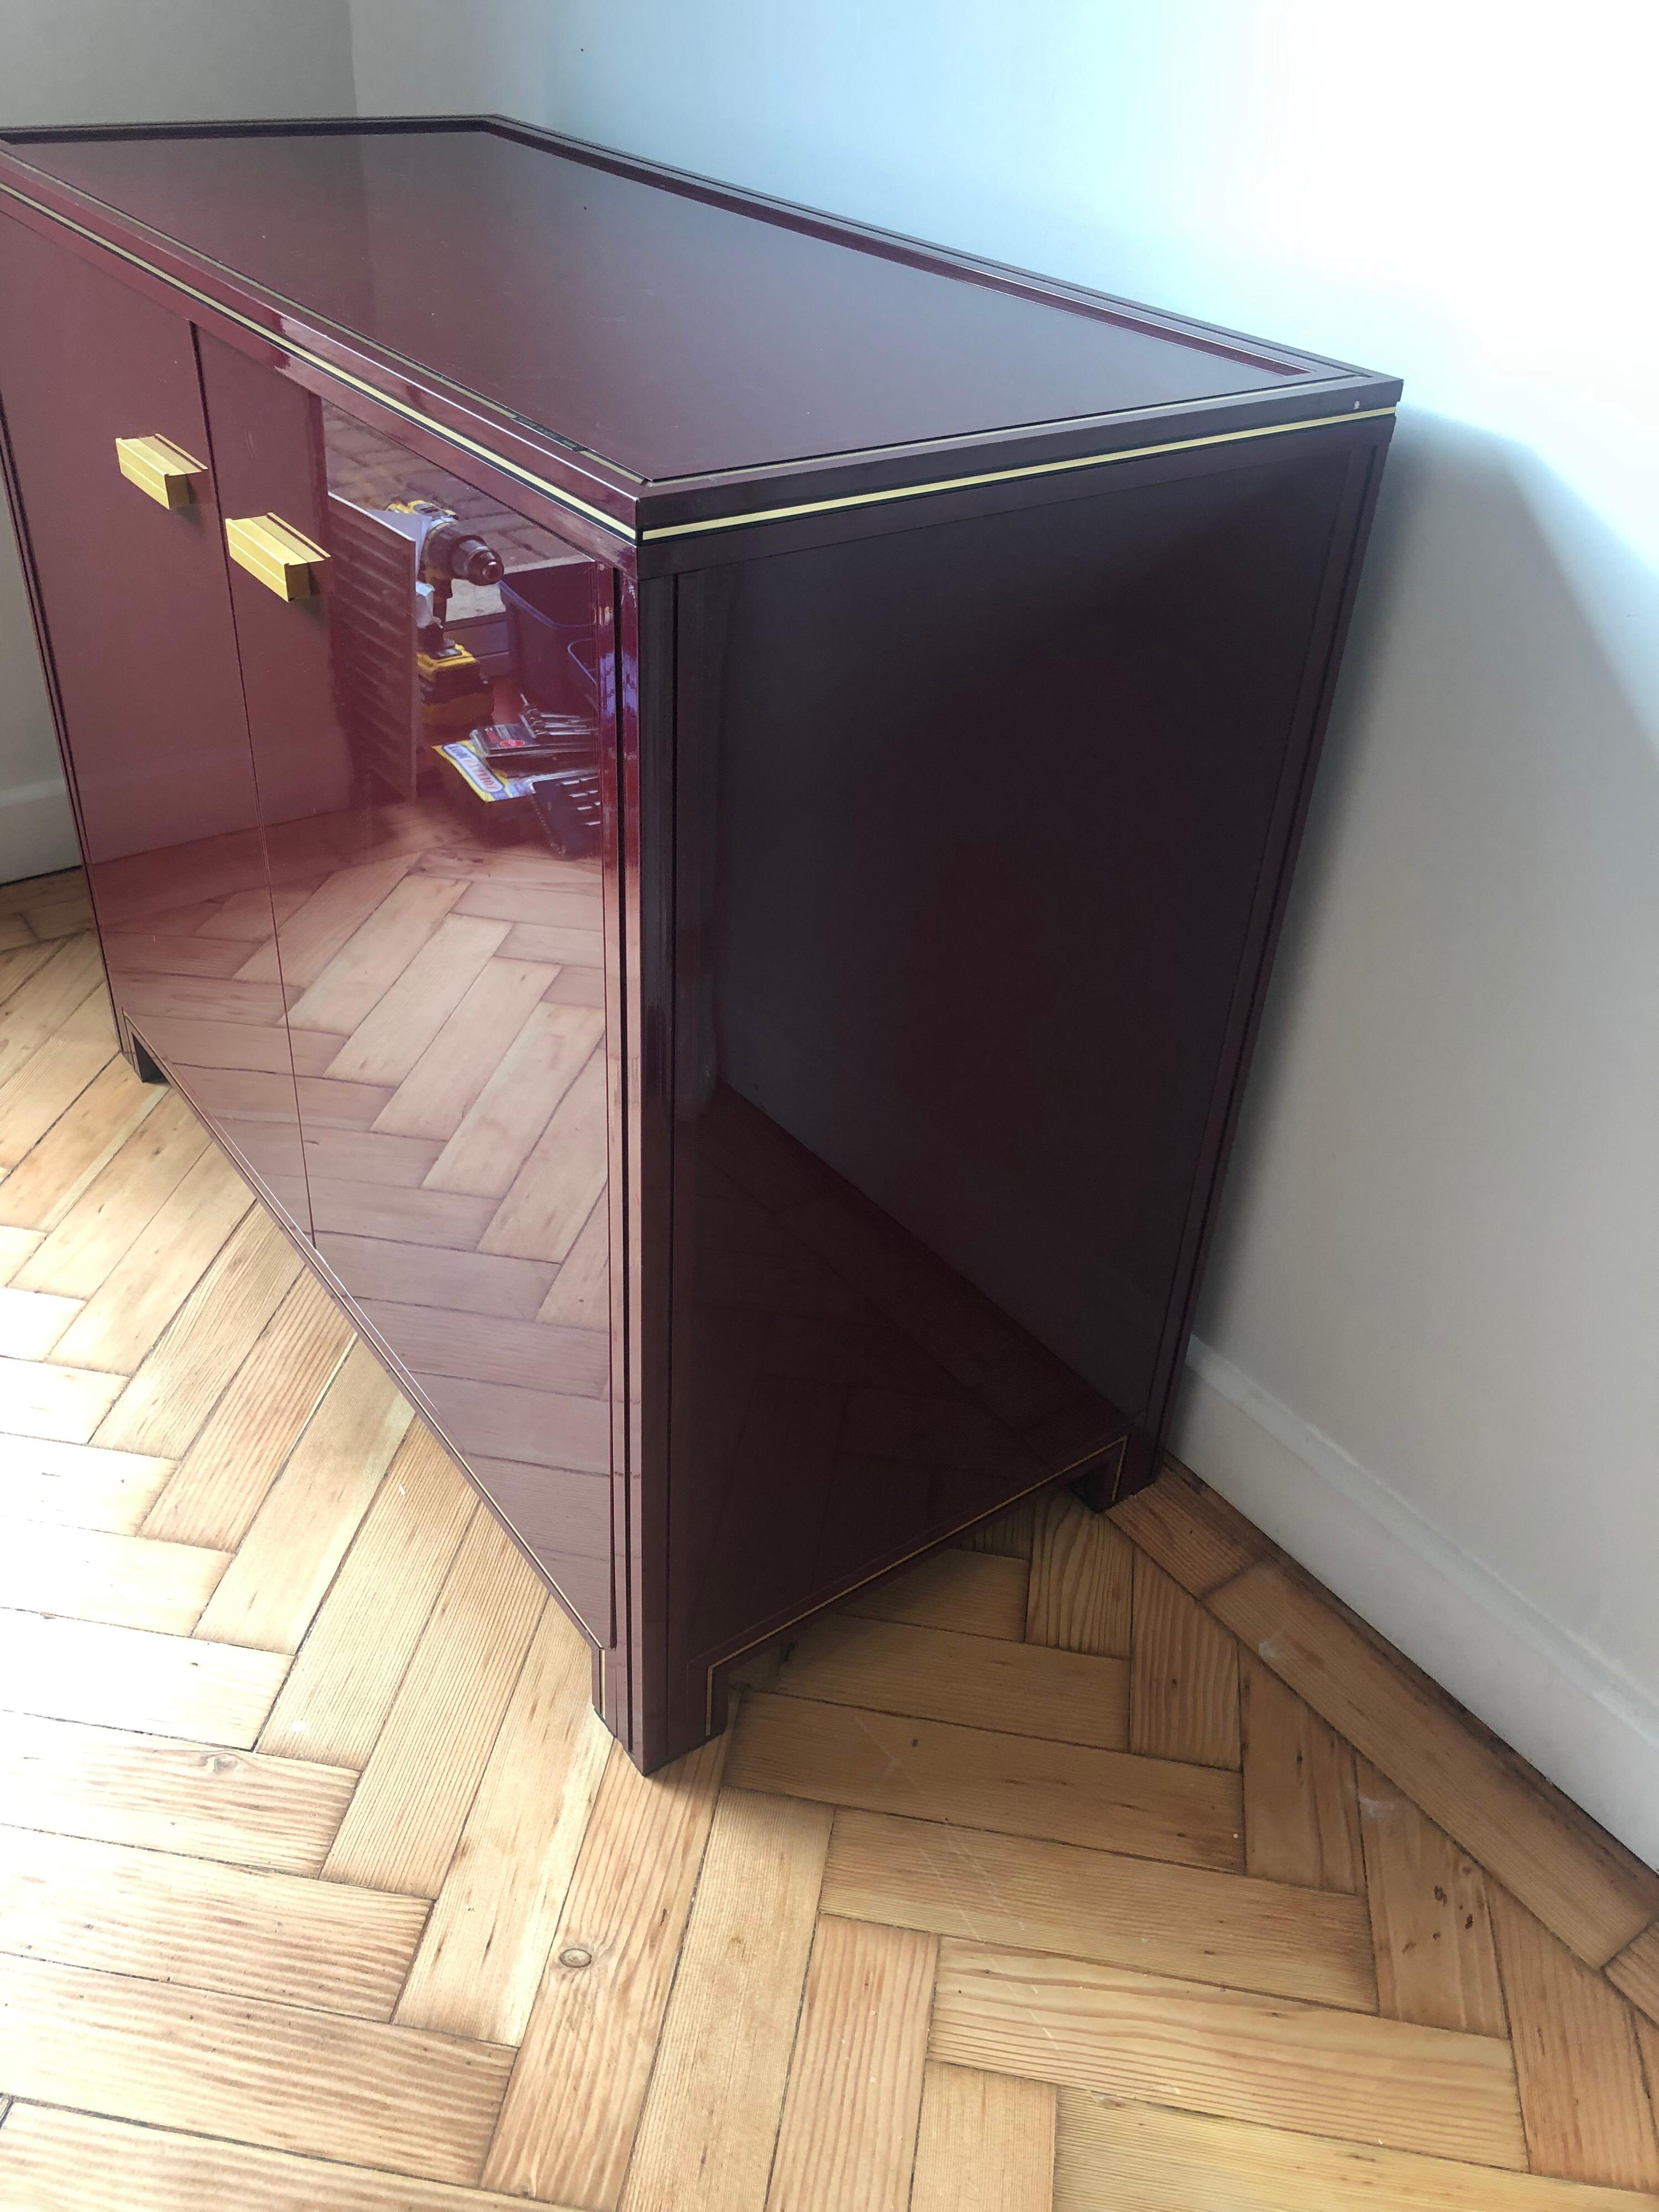 Pierre Vandel two-door cabinet in burgundy color with brass details, glass top, acrylic body and aluminum frame. The two doors open smoothly and it has a good storage size.
Overall good original condition with the occasional wear. 
 